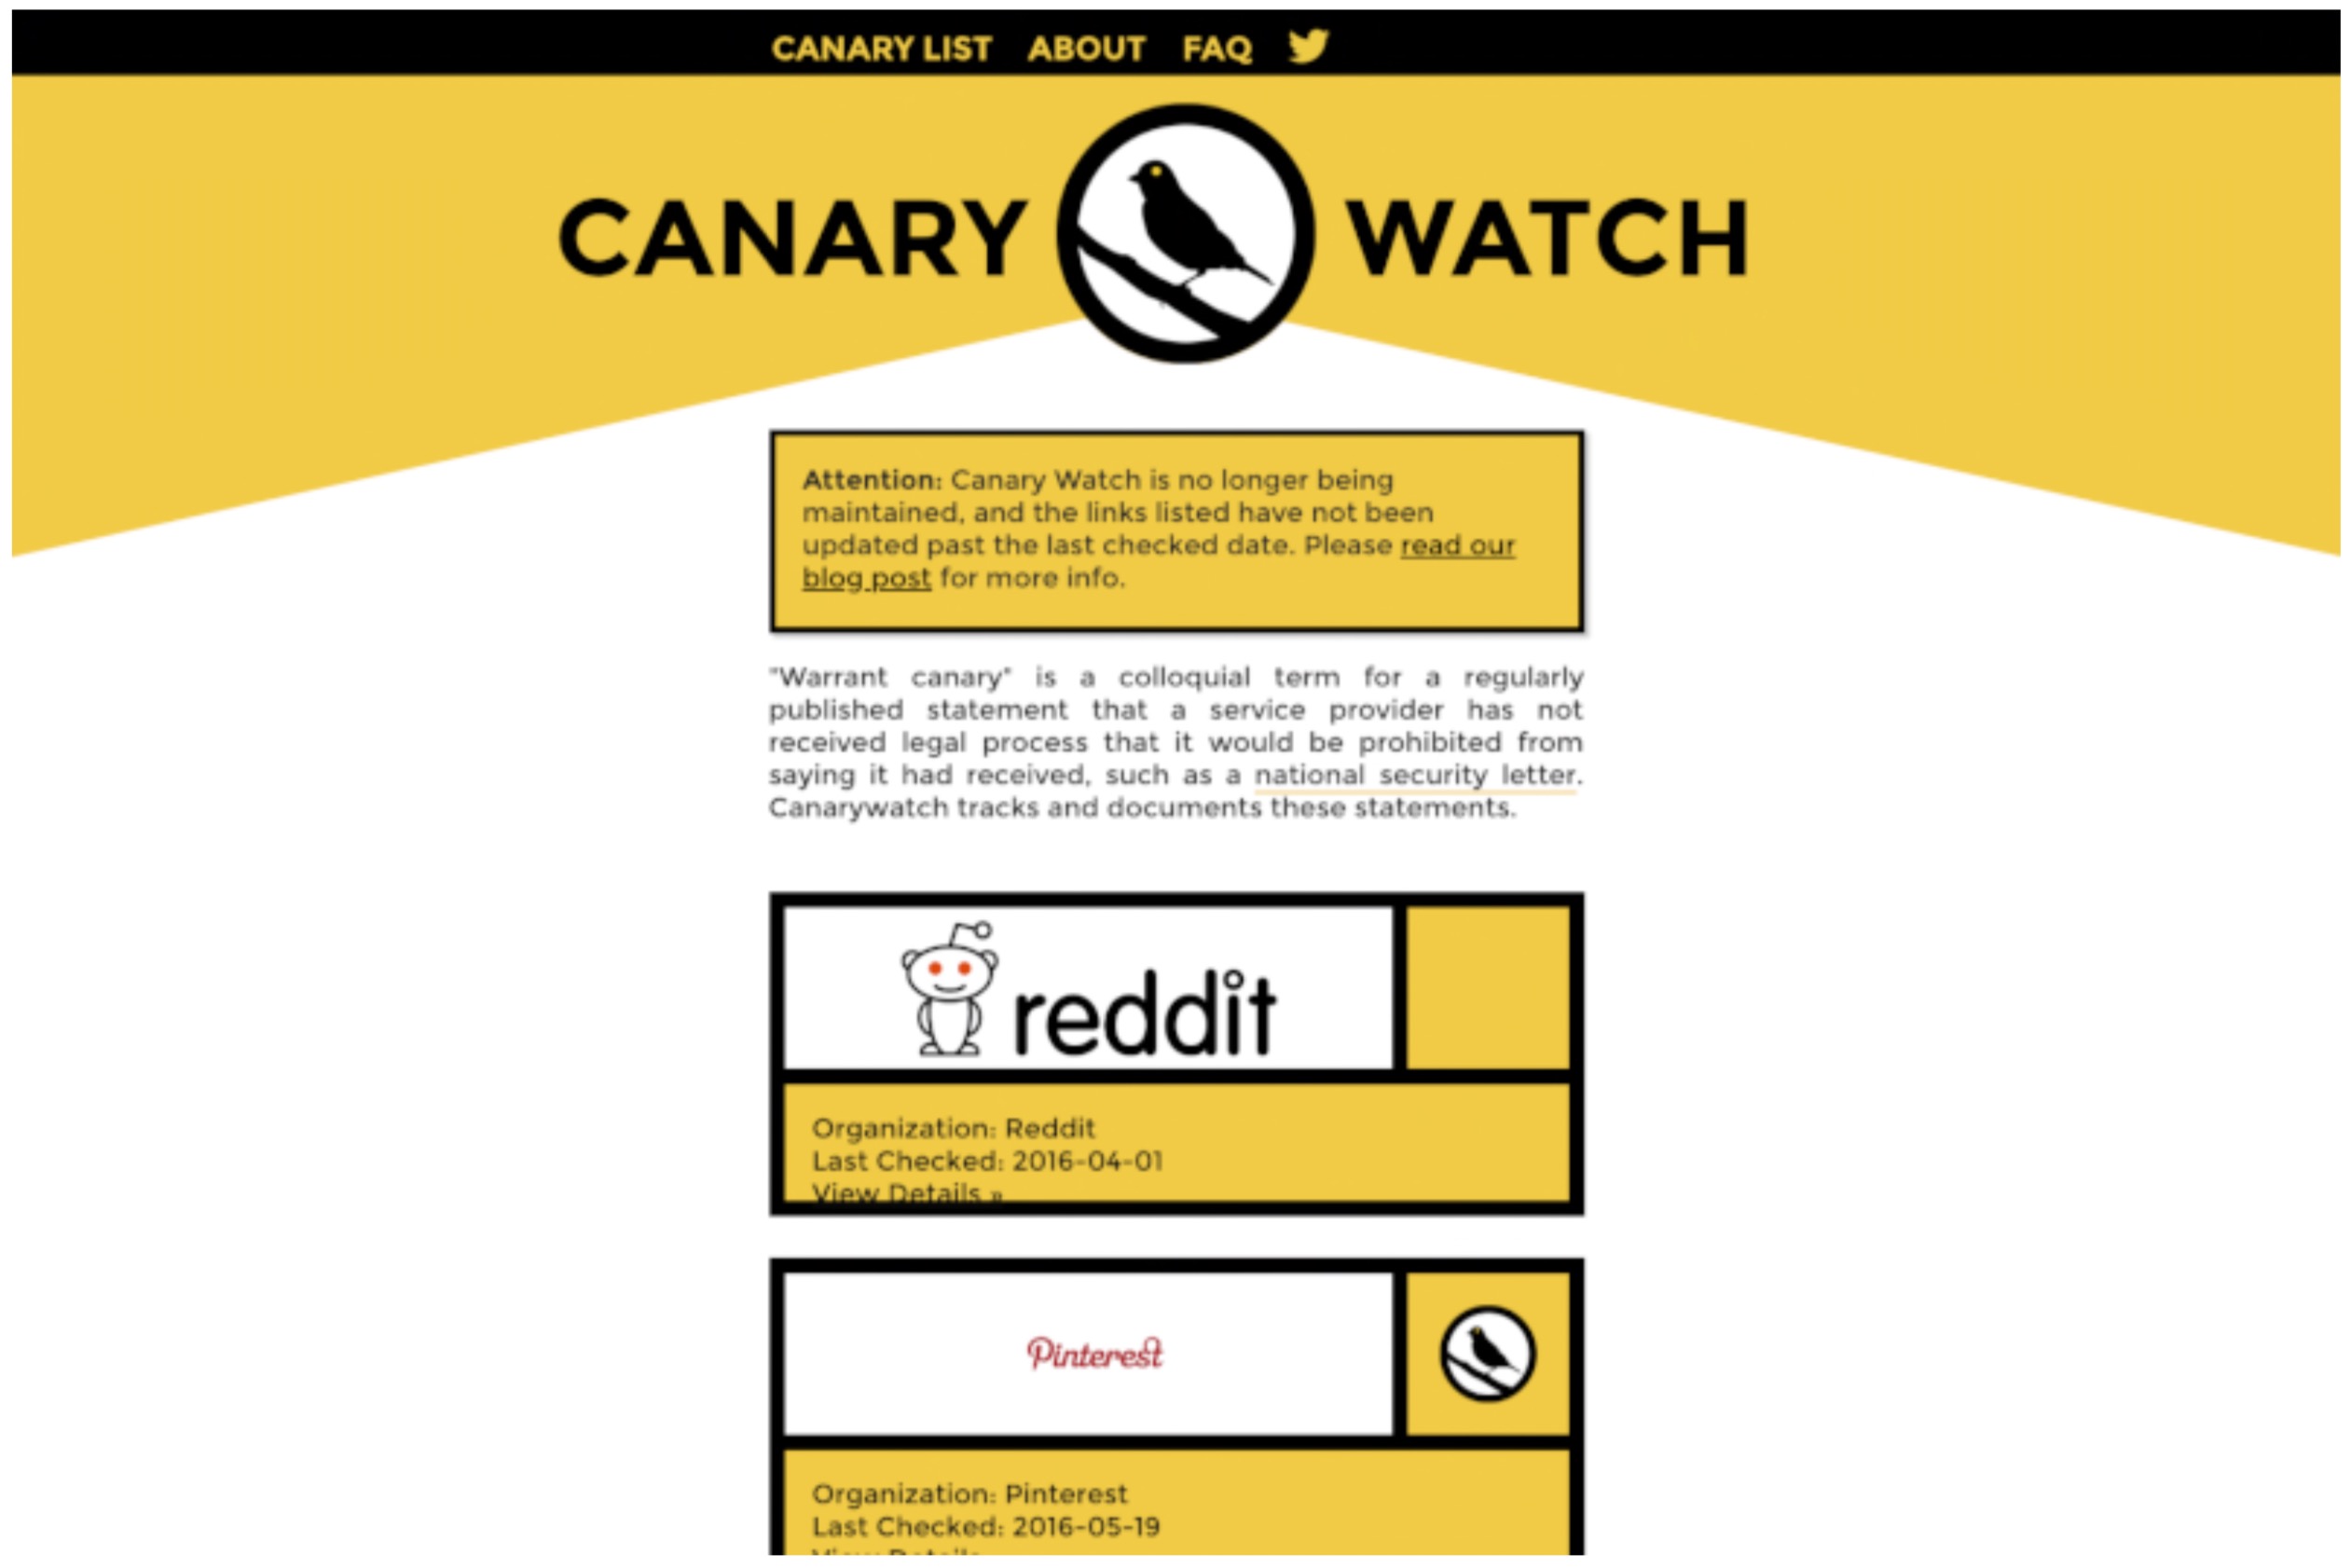 A screen capture of the canary watch website with an attention banner that reads "Attention: Canary Watch is no longer being maintained, and the links listed have not been updated past the last checked date. Please read our blog post for more info."